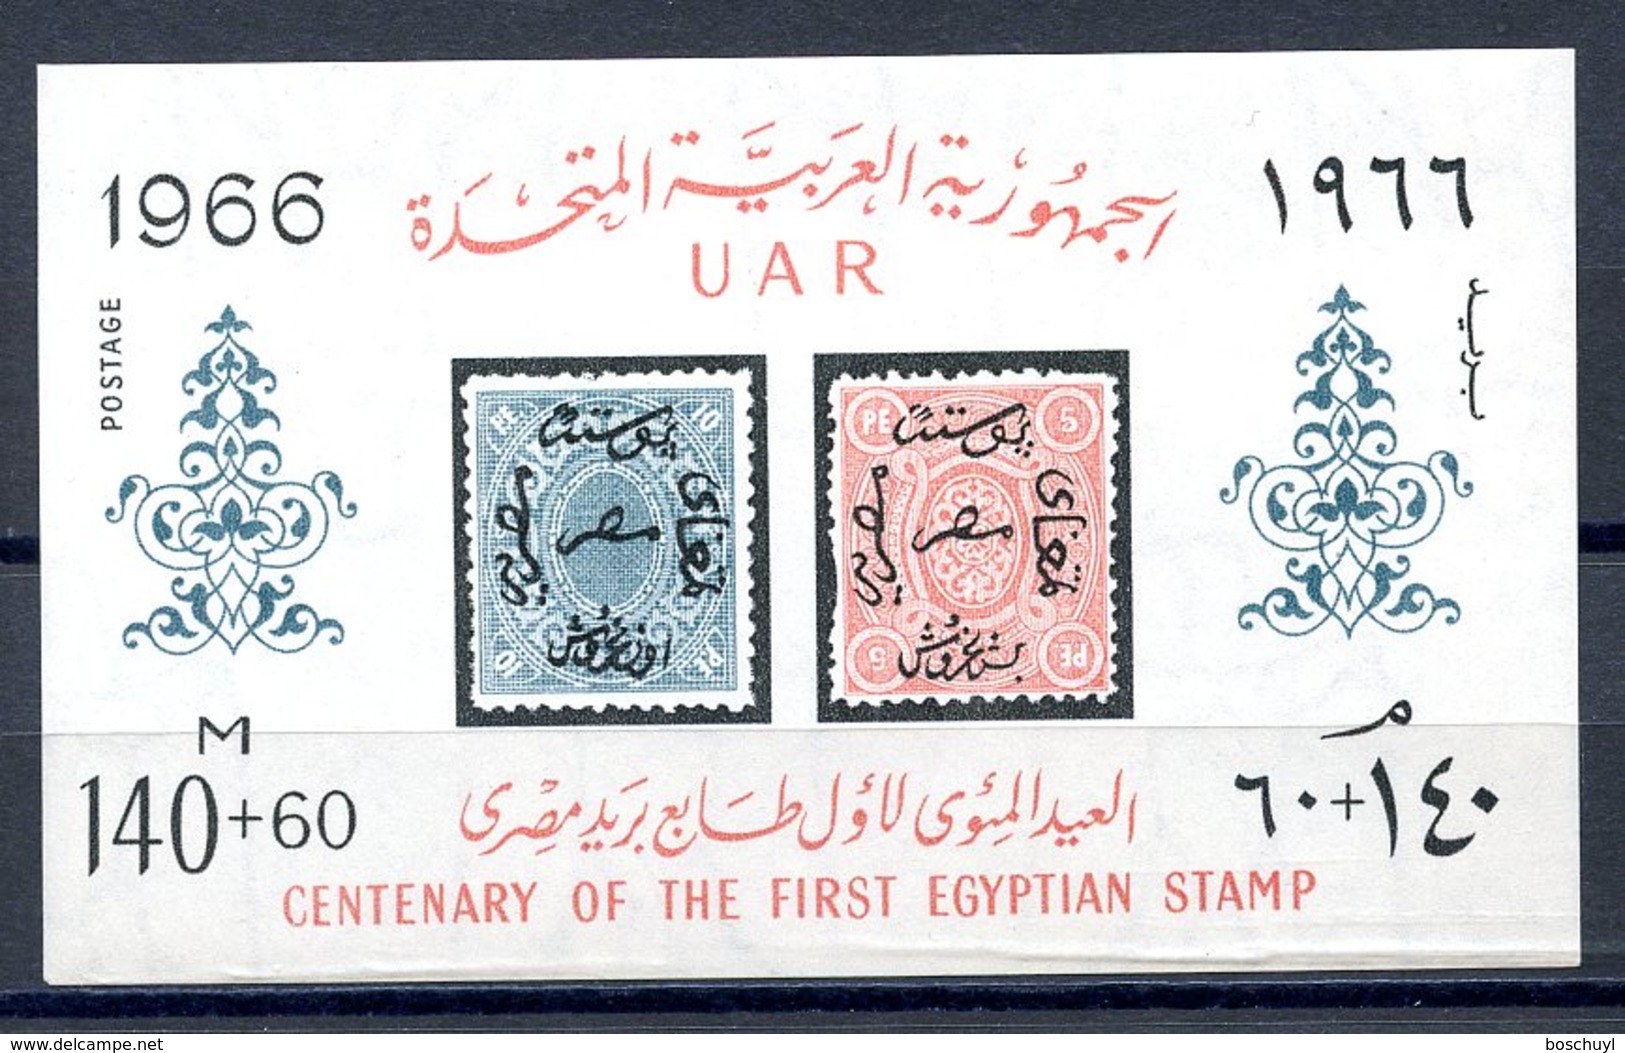 Egypt, 1966, Post Day, Stamp Centenary, MNH Imperforated Sheet, Michel Block 19 - Blocs-feuillets